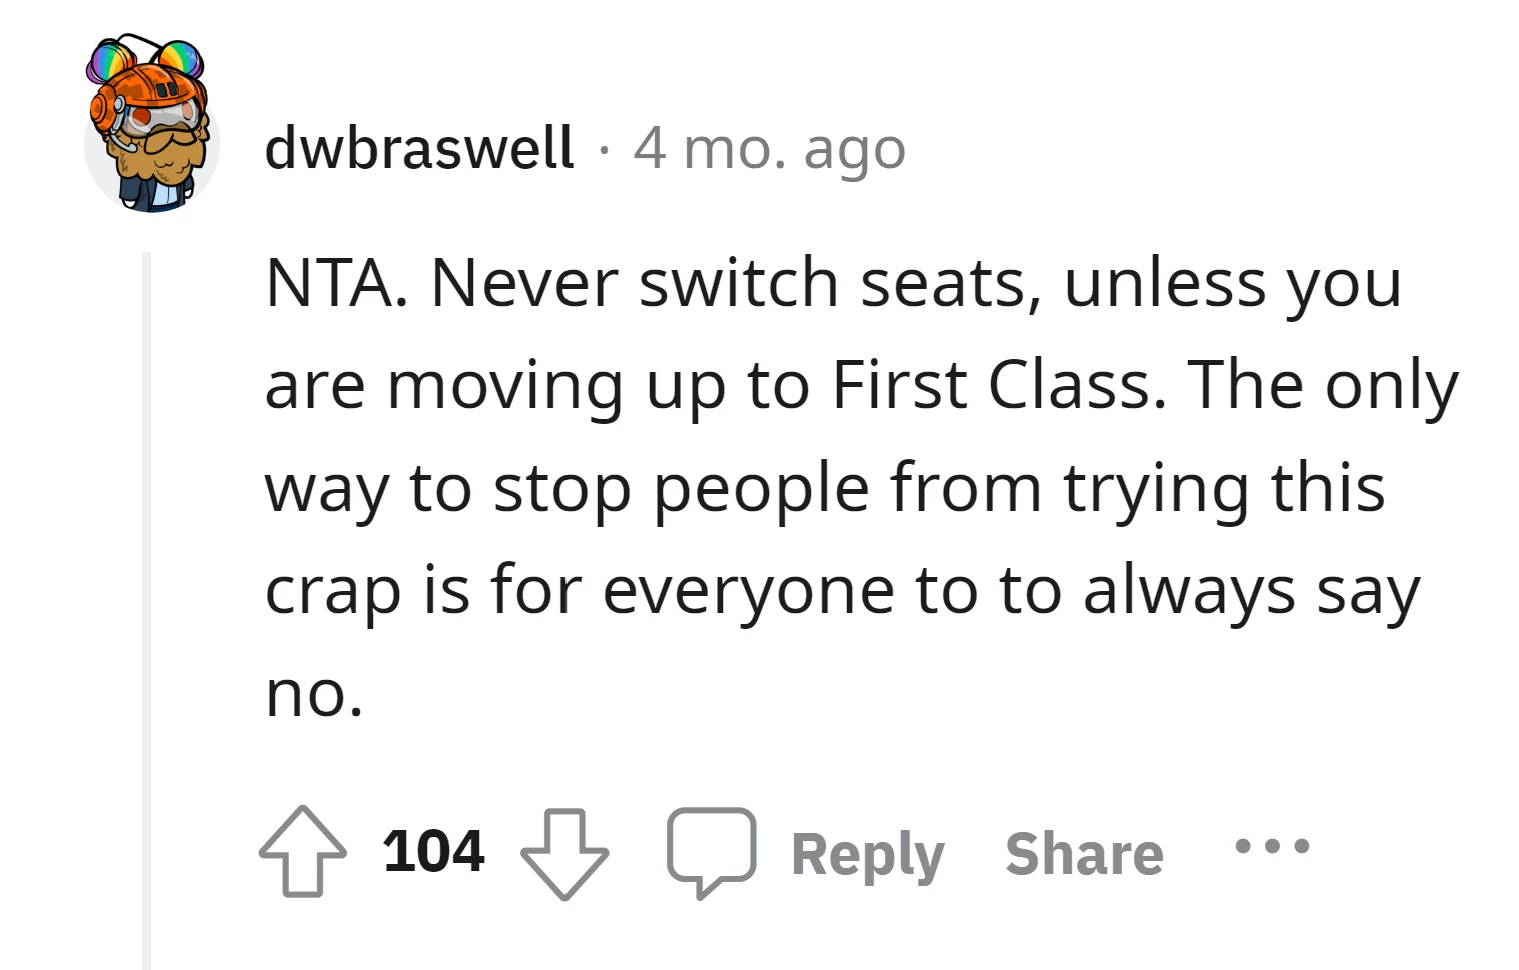 The only reason why you should switch seat